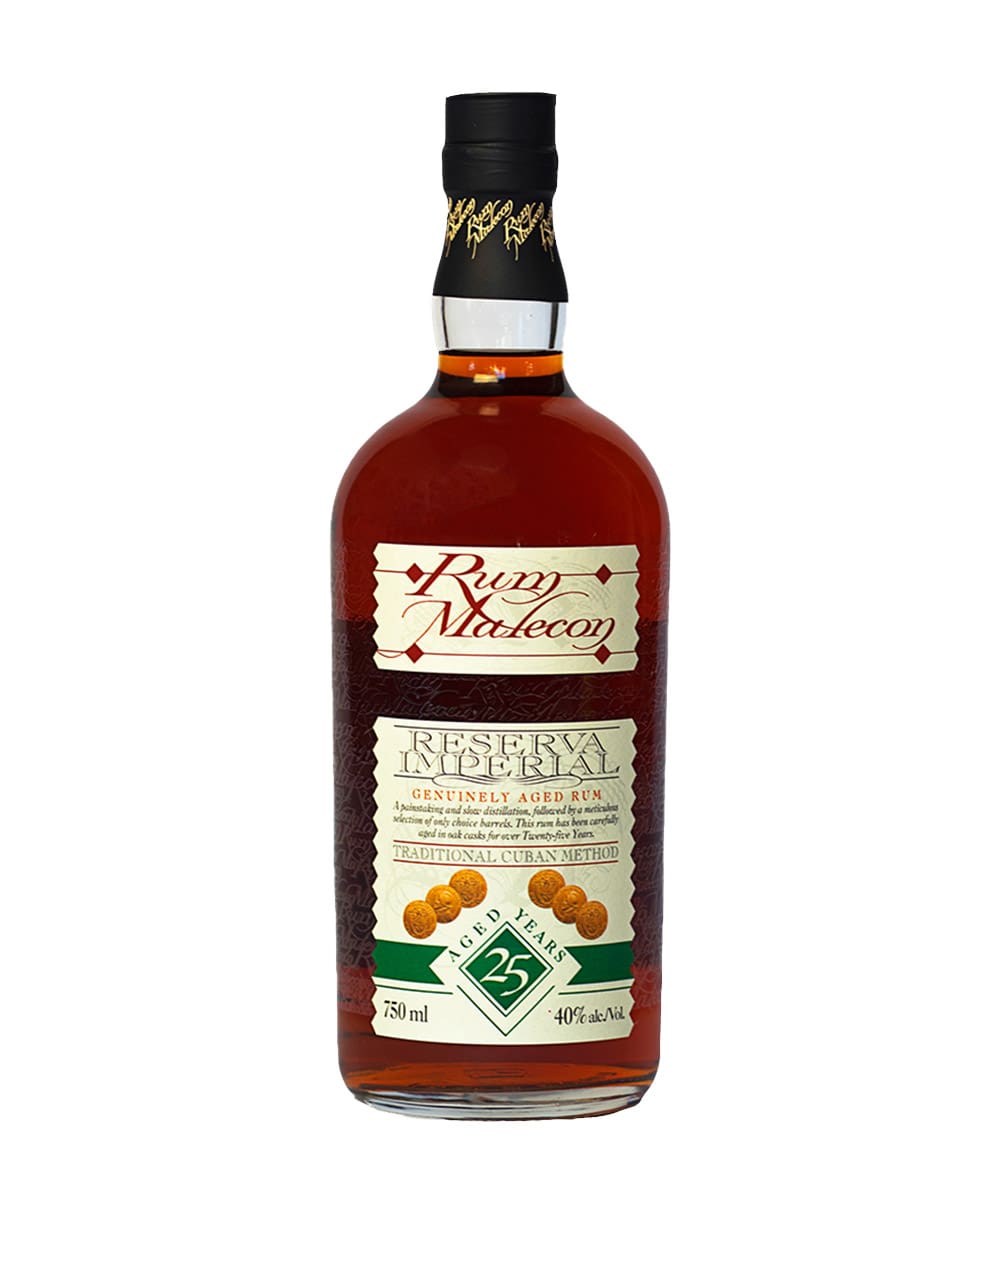 Malecon Reserva Imperial Rum 25 Year